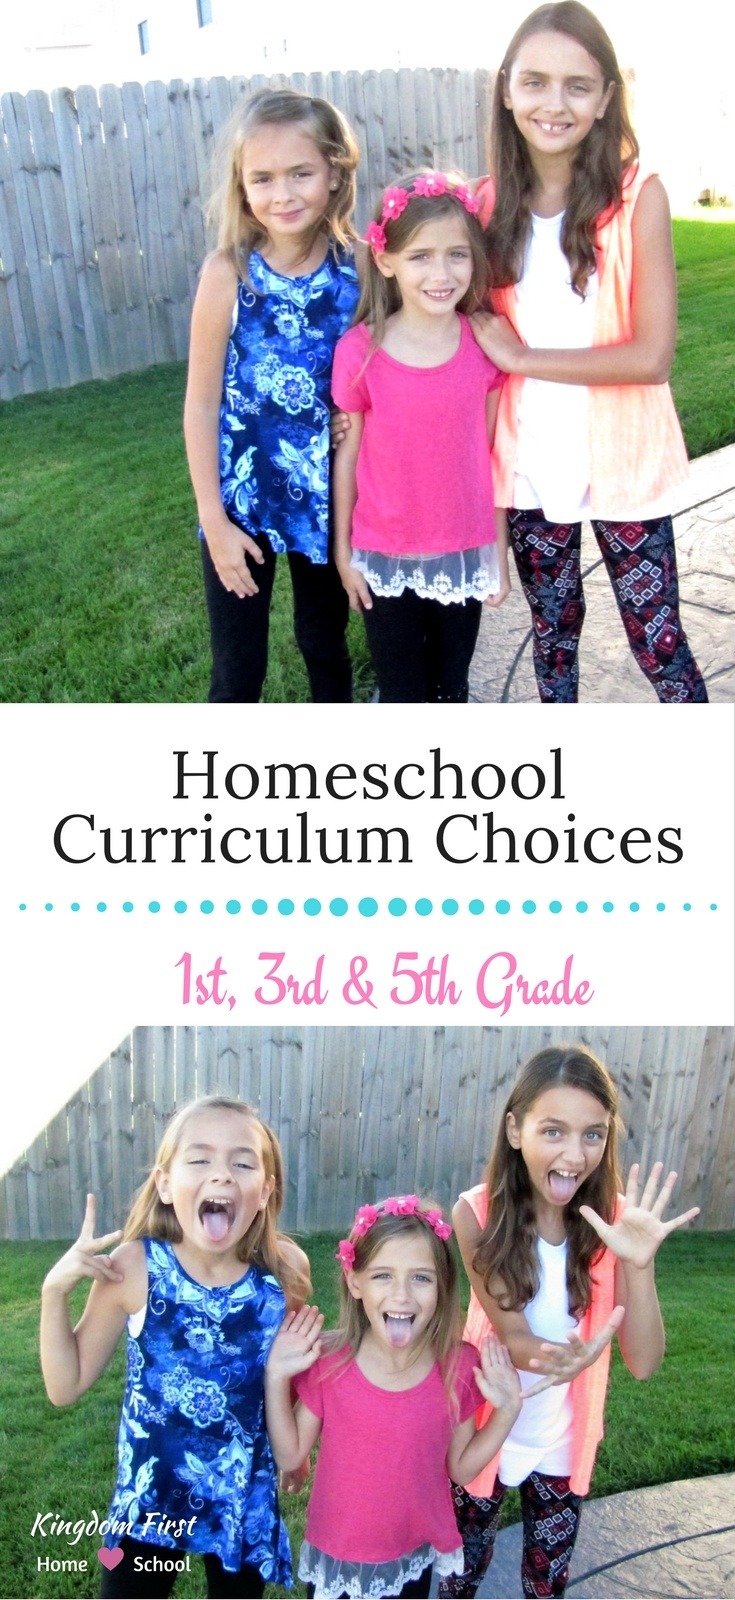 Homeschool curriculum choices for 1st, 3rd and 5th grade.